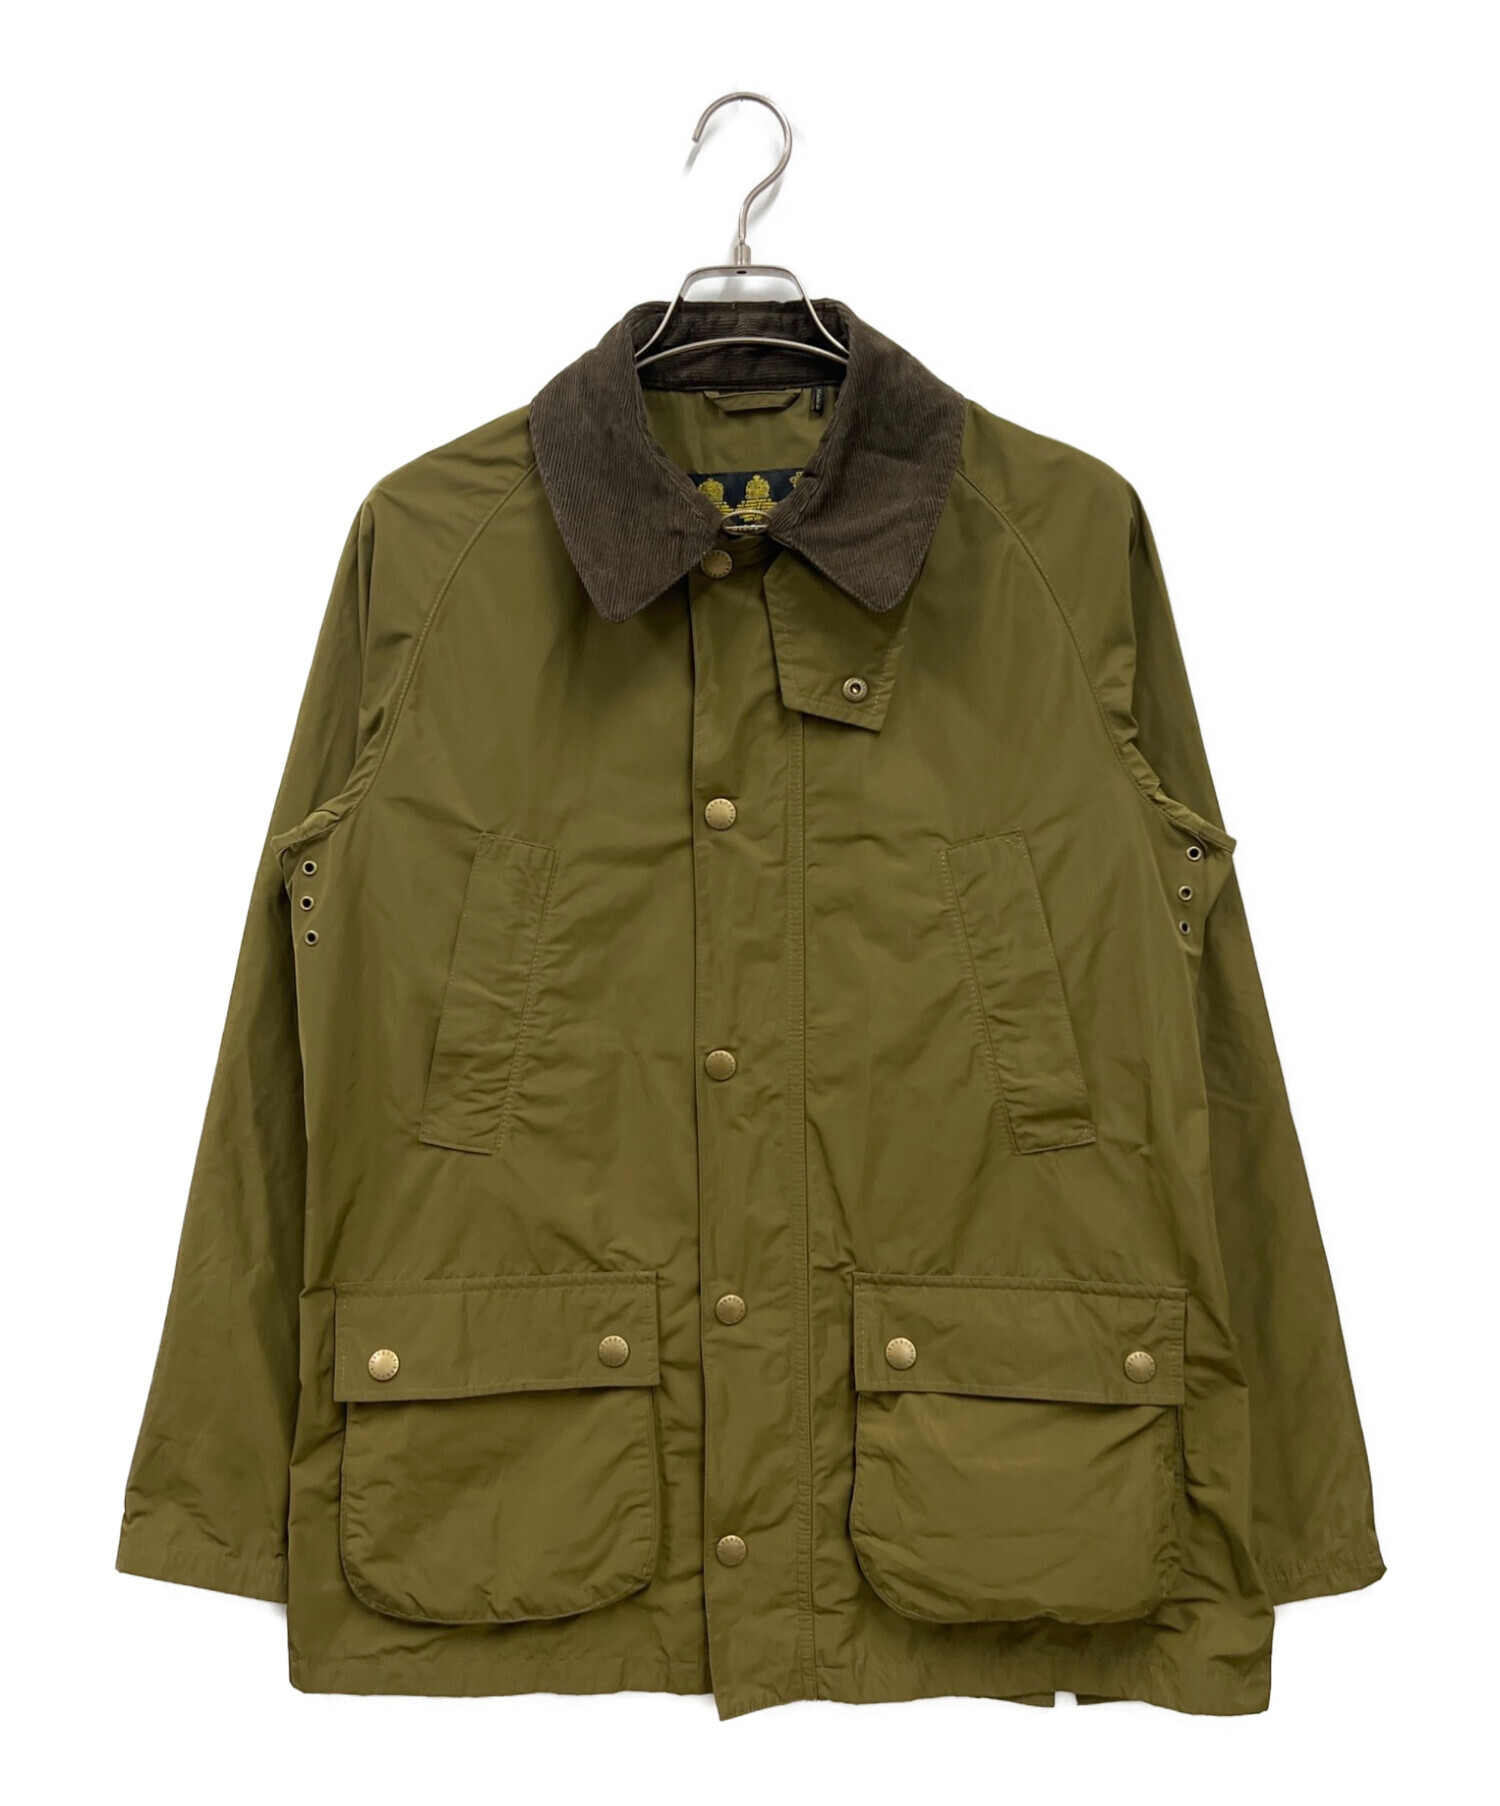 Barbour BEDALE SL size40使用状態未使用タグ付き - ブルゾン